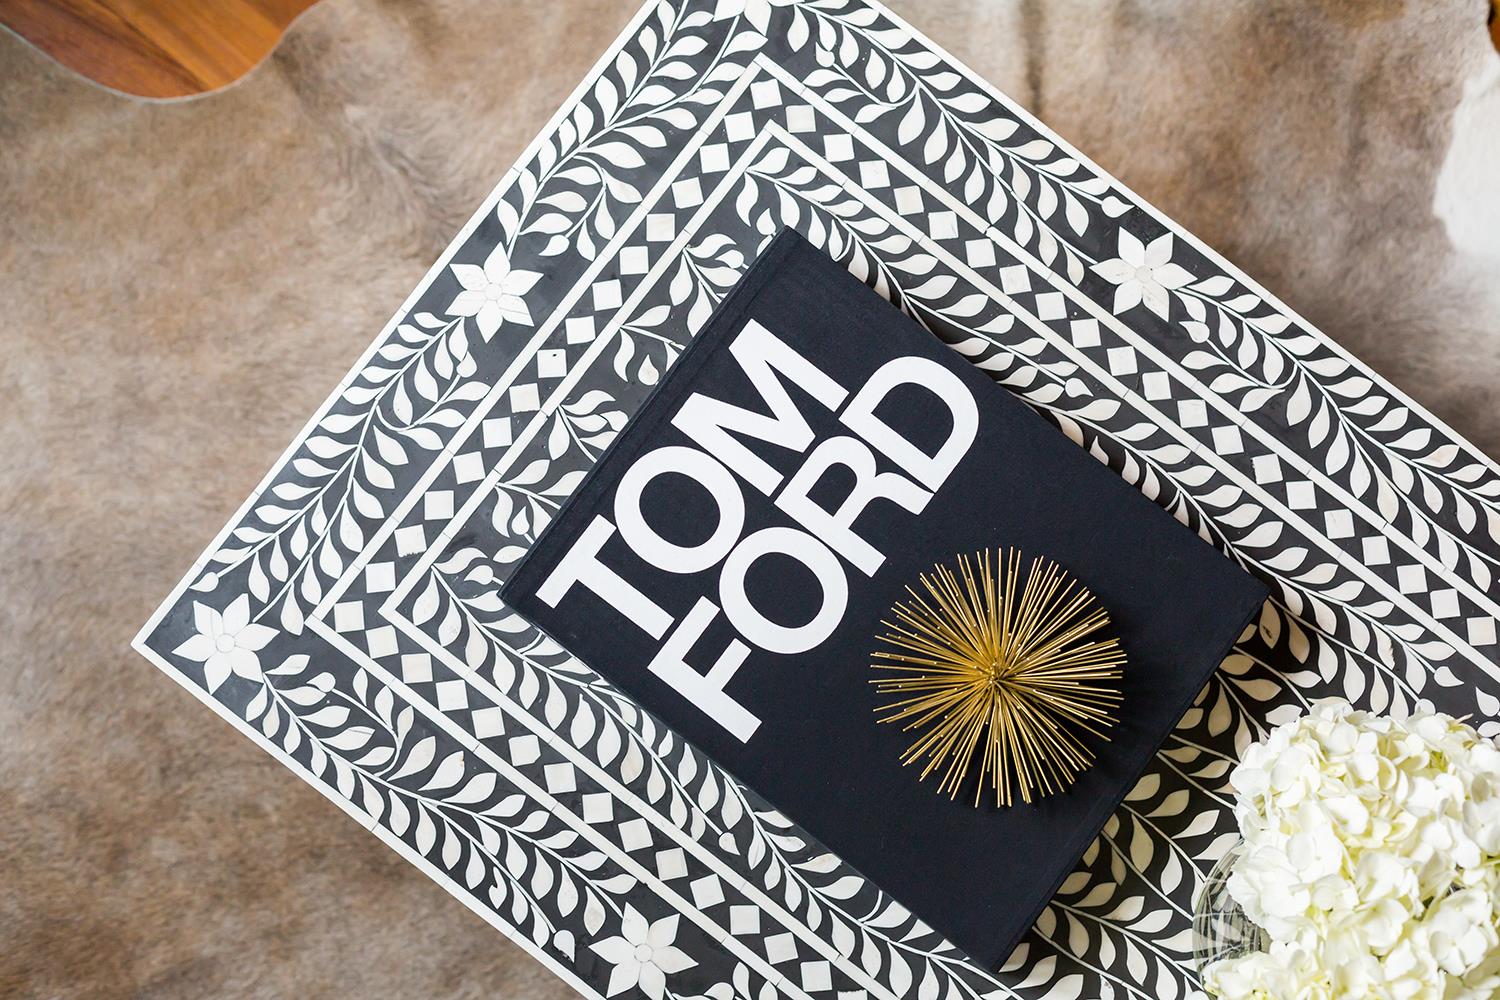 Tom Ford coffee table book - household items - by owner